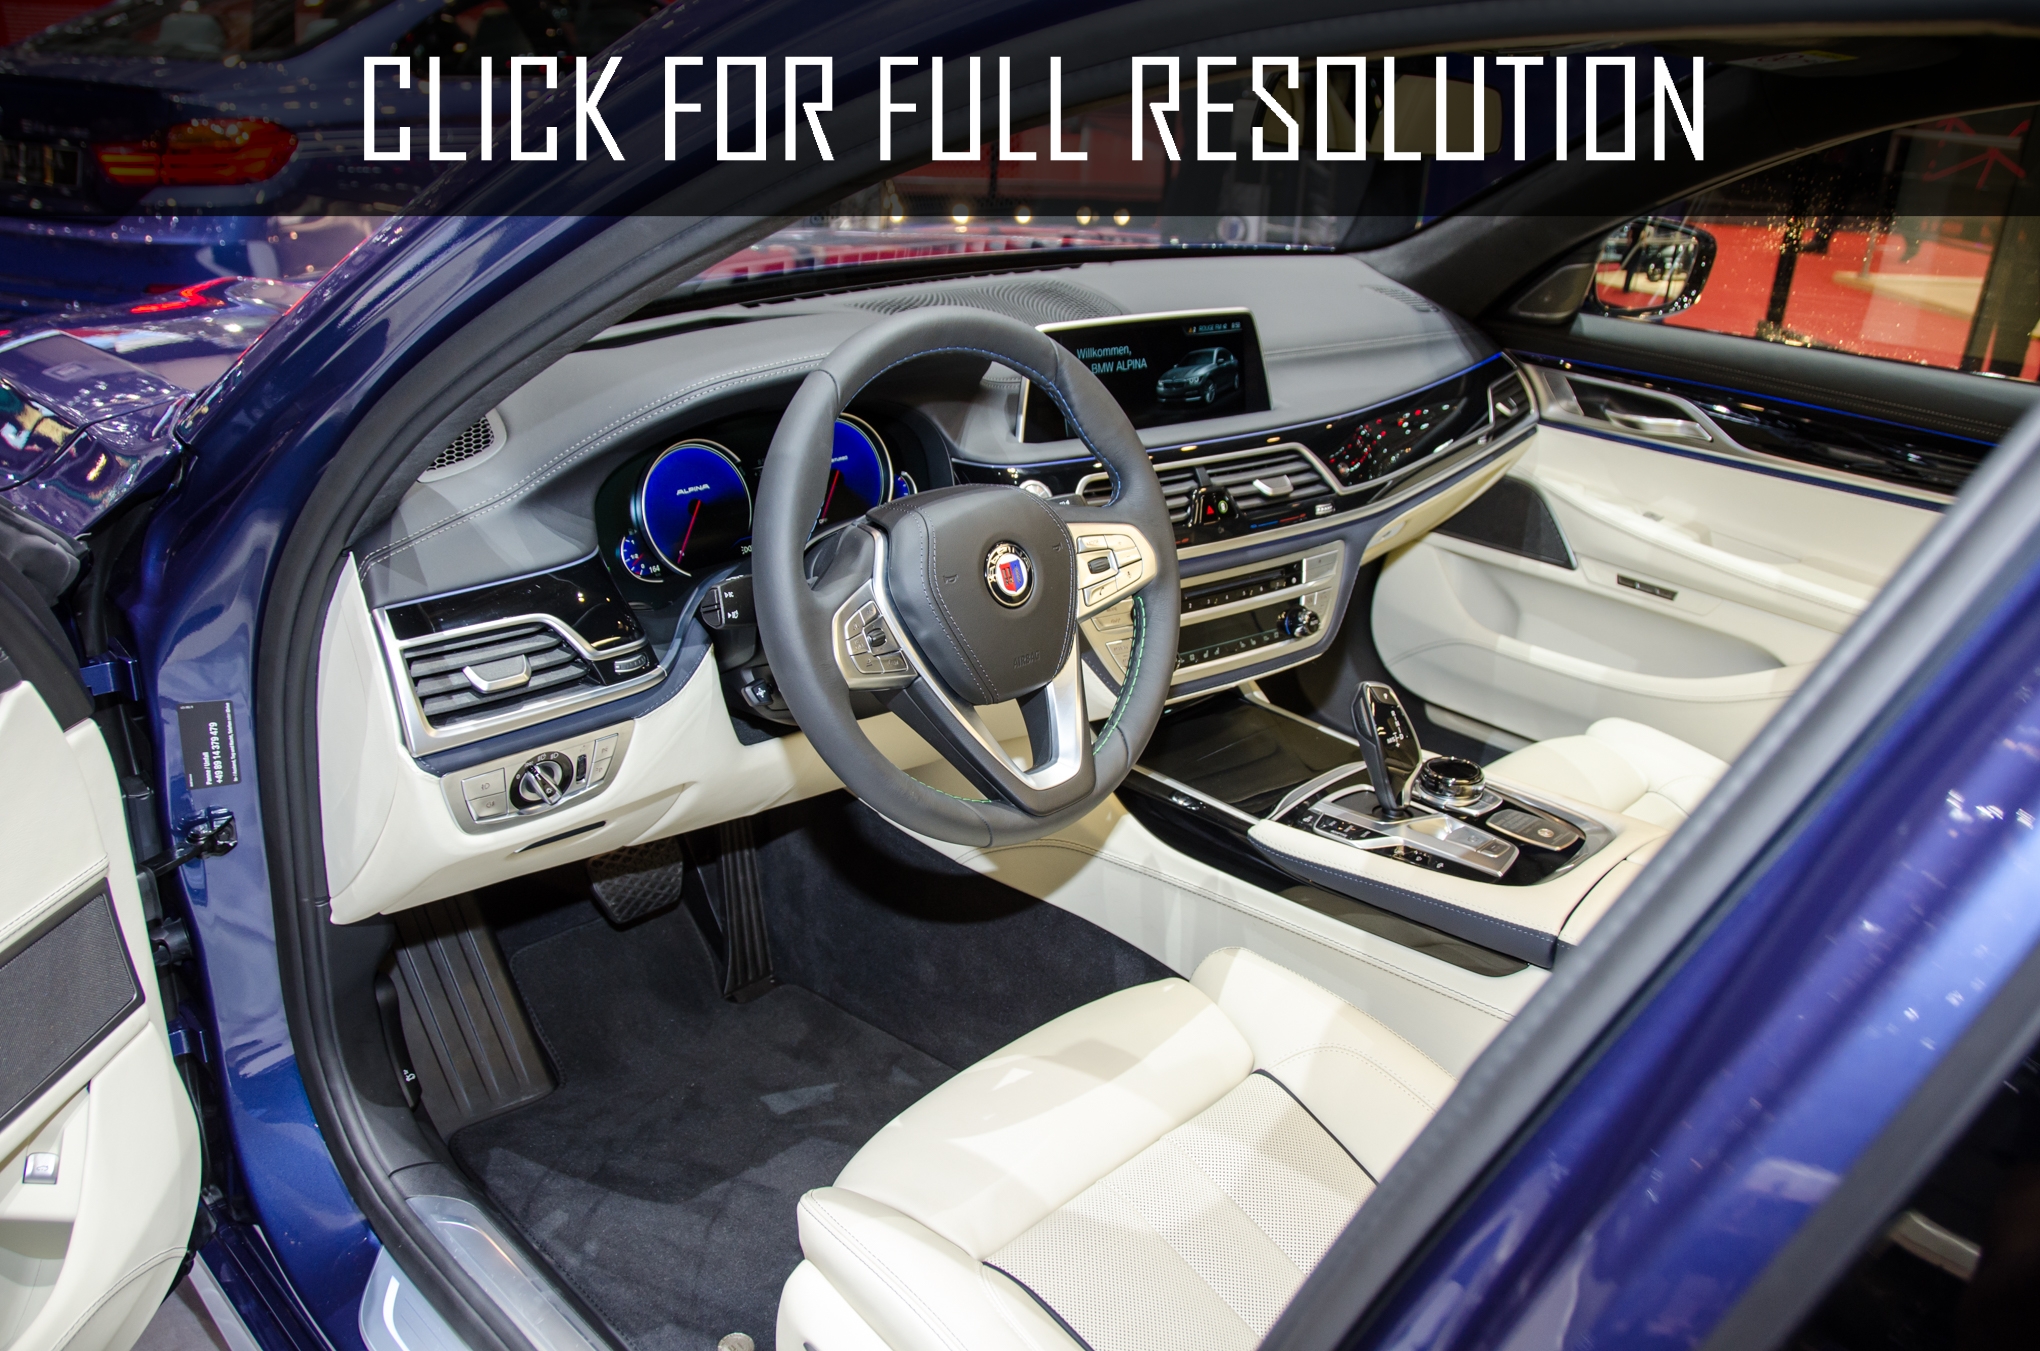 2017 Bmw Alpina Best Image Gallery 18 19 Share And Download